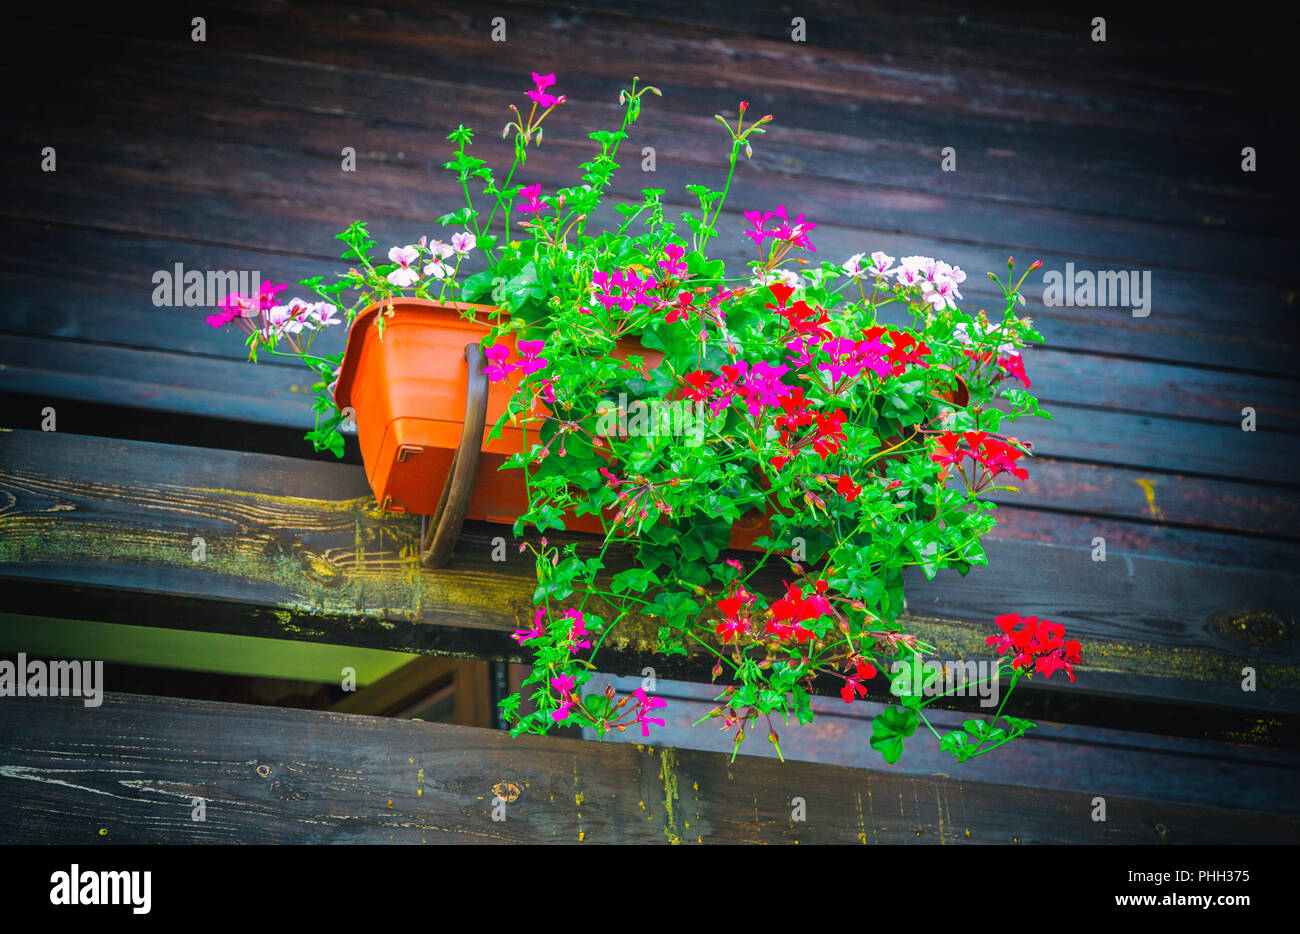 Flower pot on a wooden wall Stock Photo